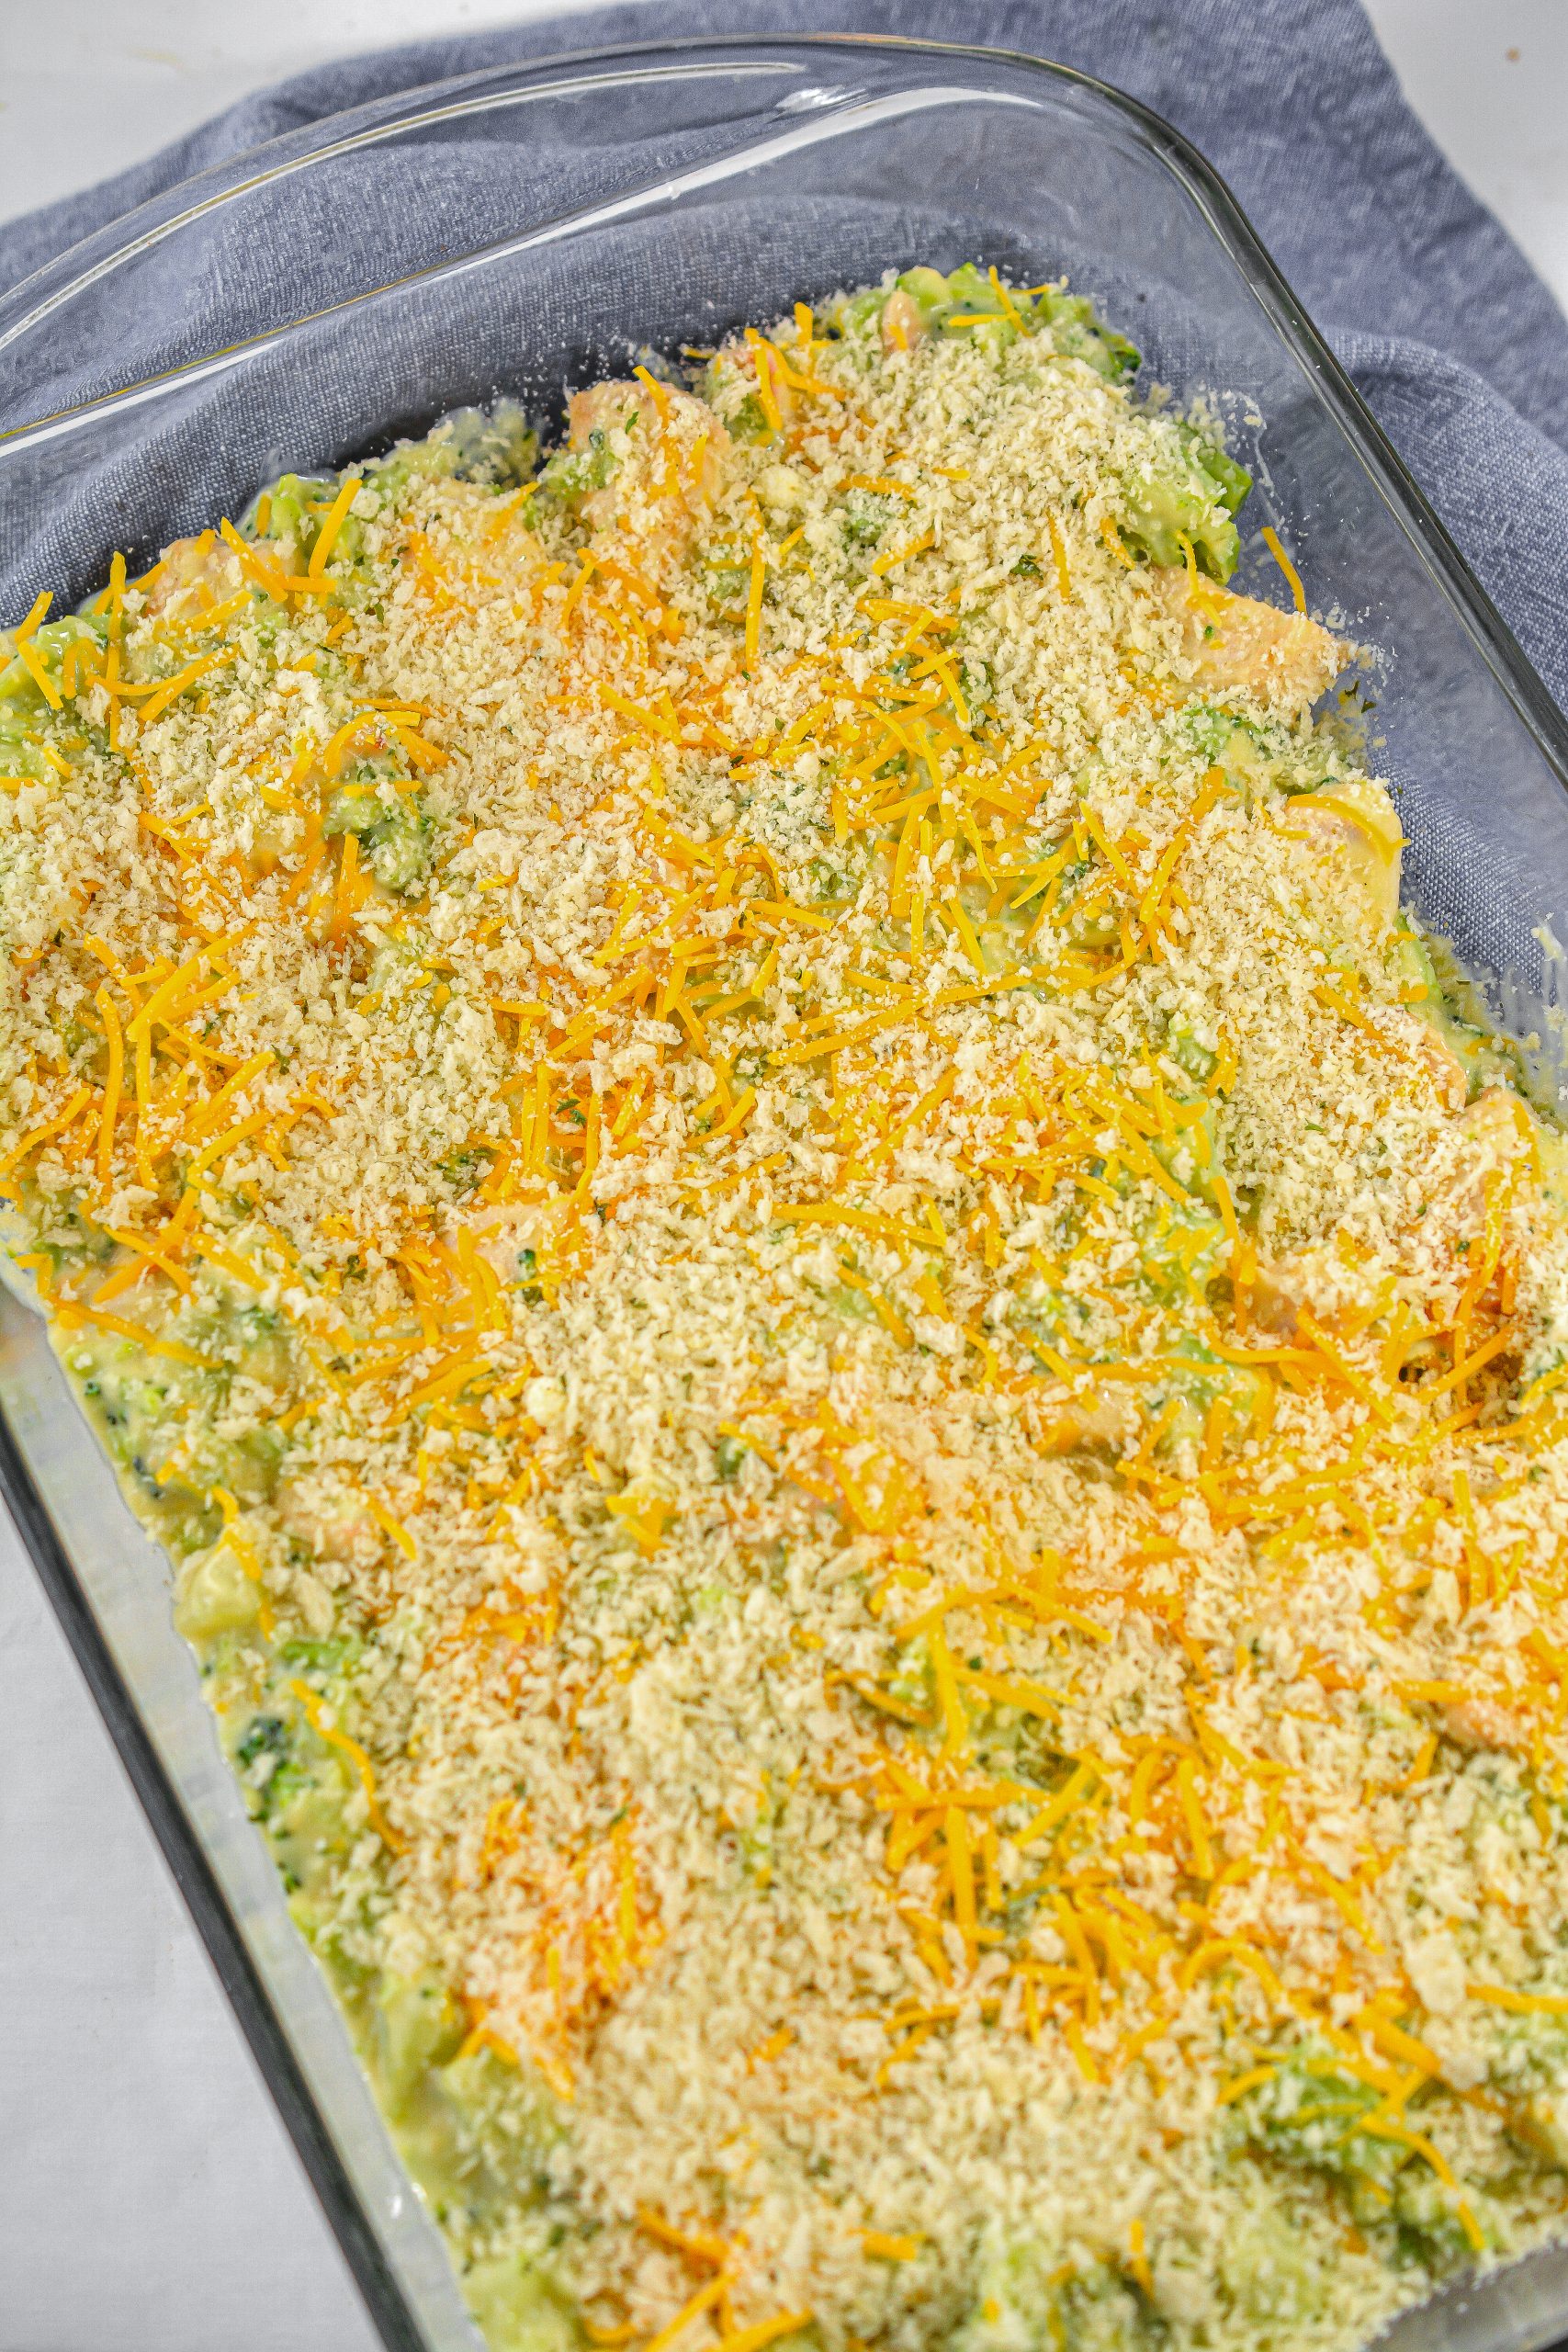 Sprinkle the breadcrumb mixture over the casserole.